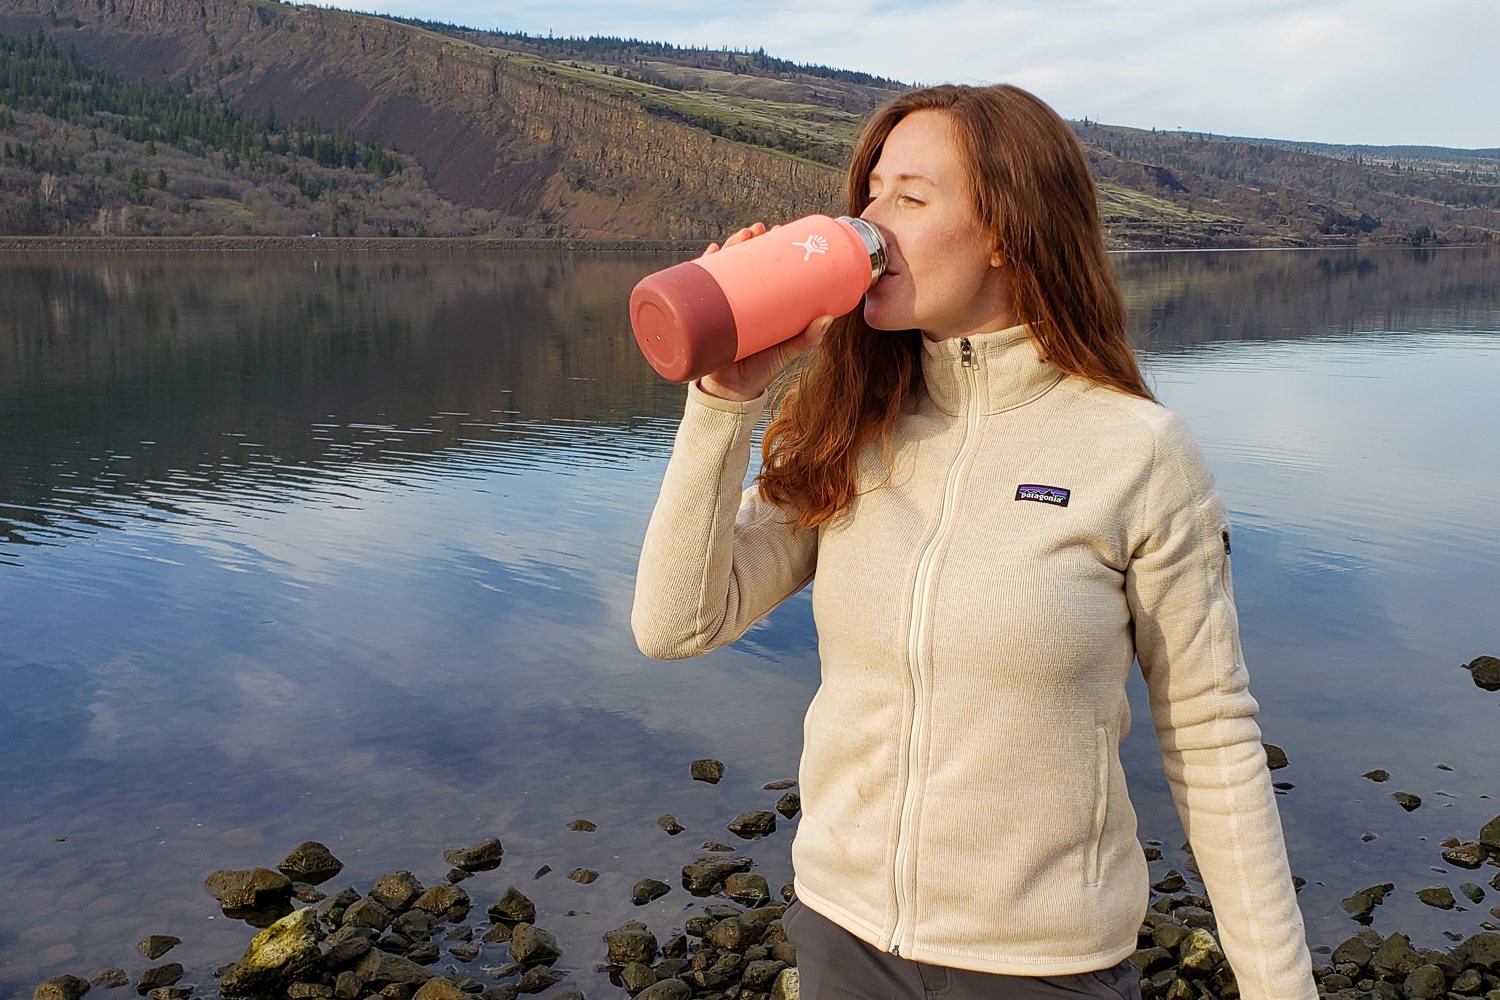 A person drinking from a Hydro Flask with a bottle boot on it in front of a river view